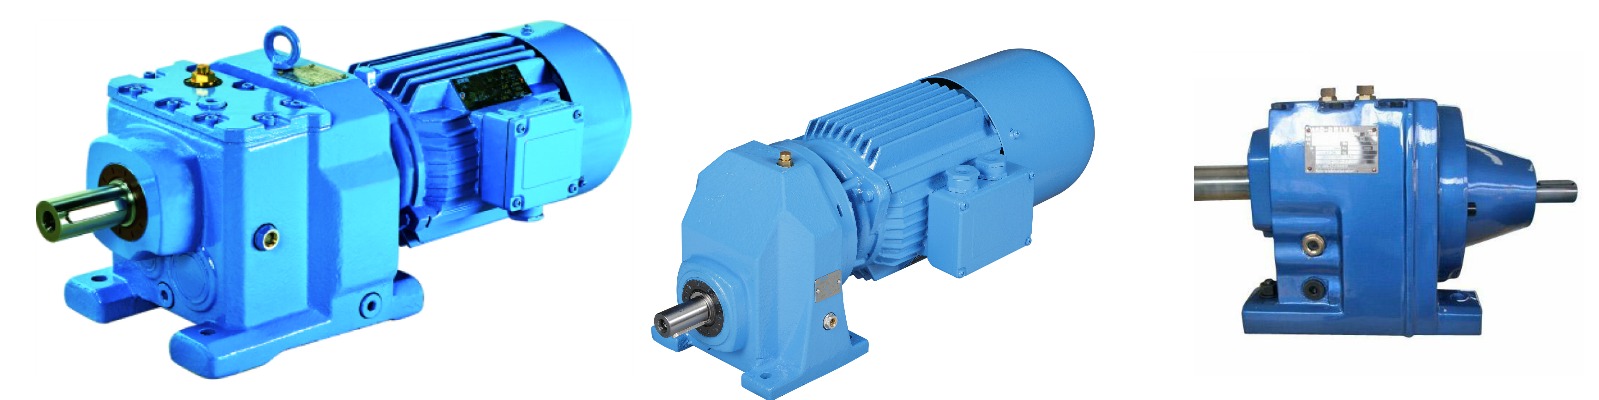 Helical Gear Motor, Inline Helical Gearbox Manufacturer